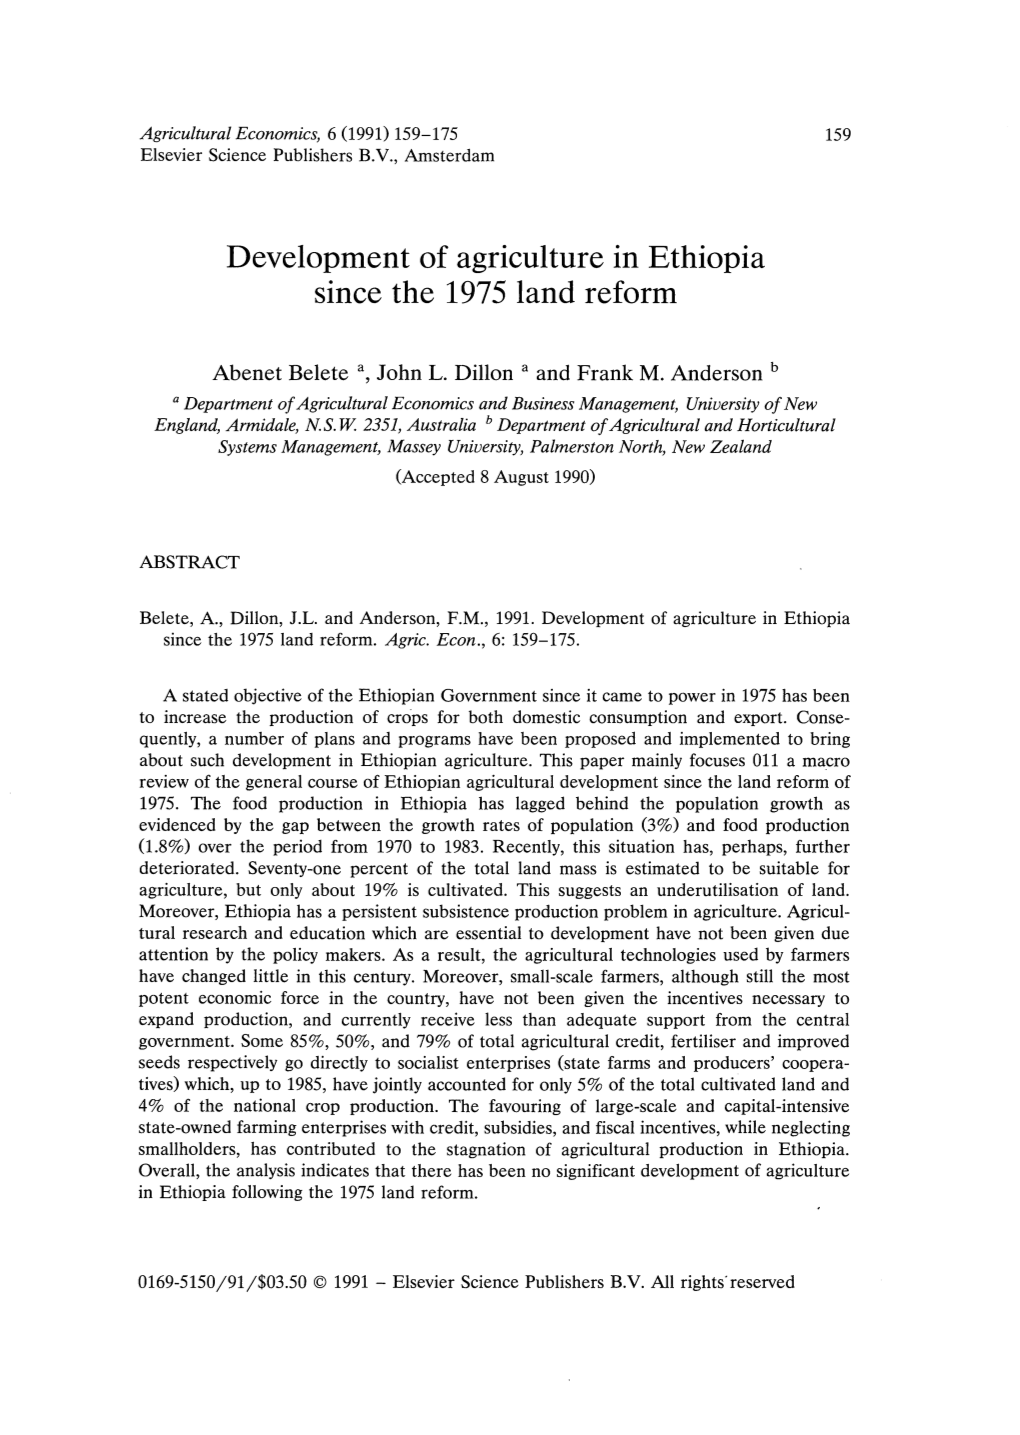 Development of Agriculture in Ethiopia Since the 1975 Land Reform